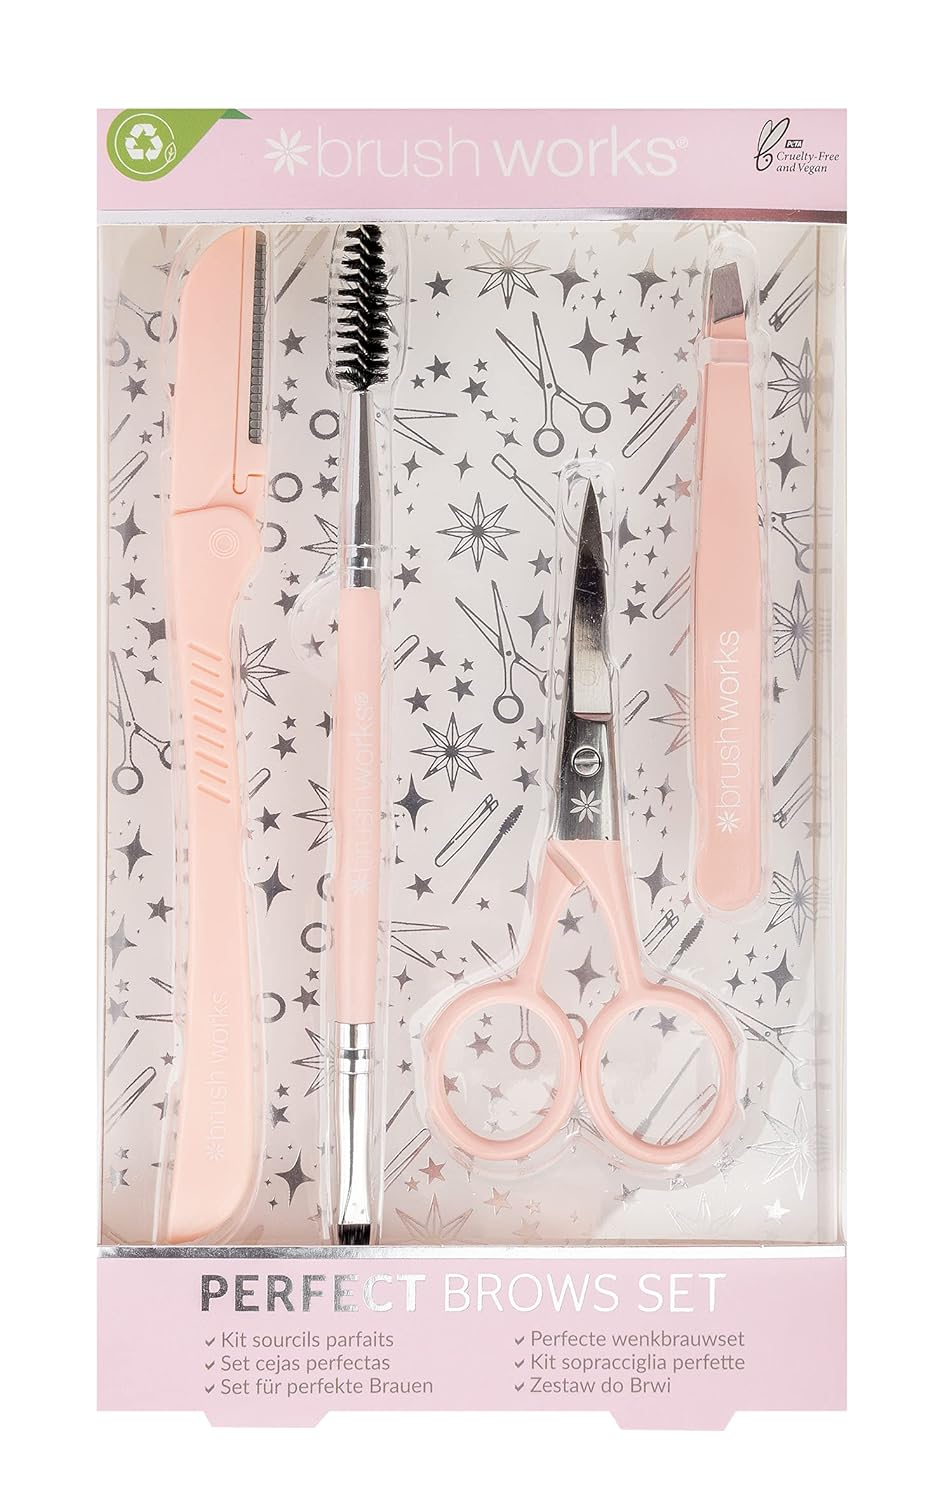 Brushworks Perfect Brows Set, Pink, One Size